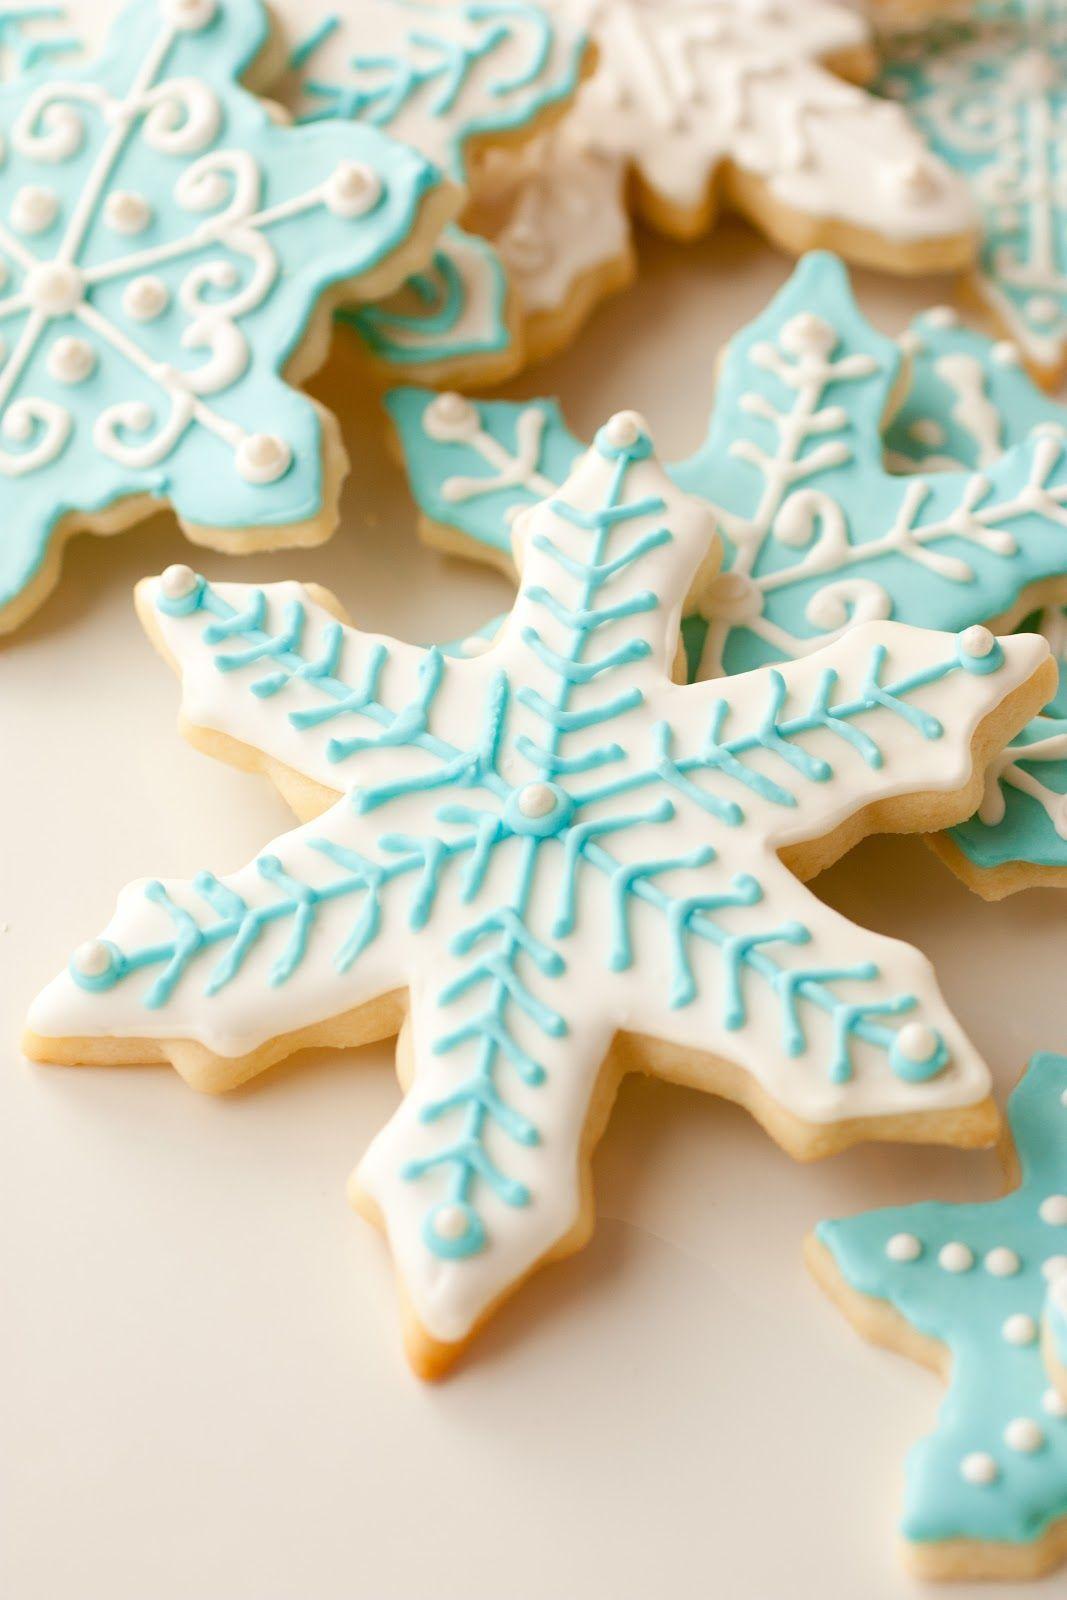 Sugar Cookie Icing HD Wallpaper, Background Image